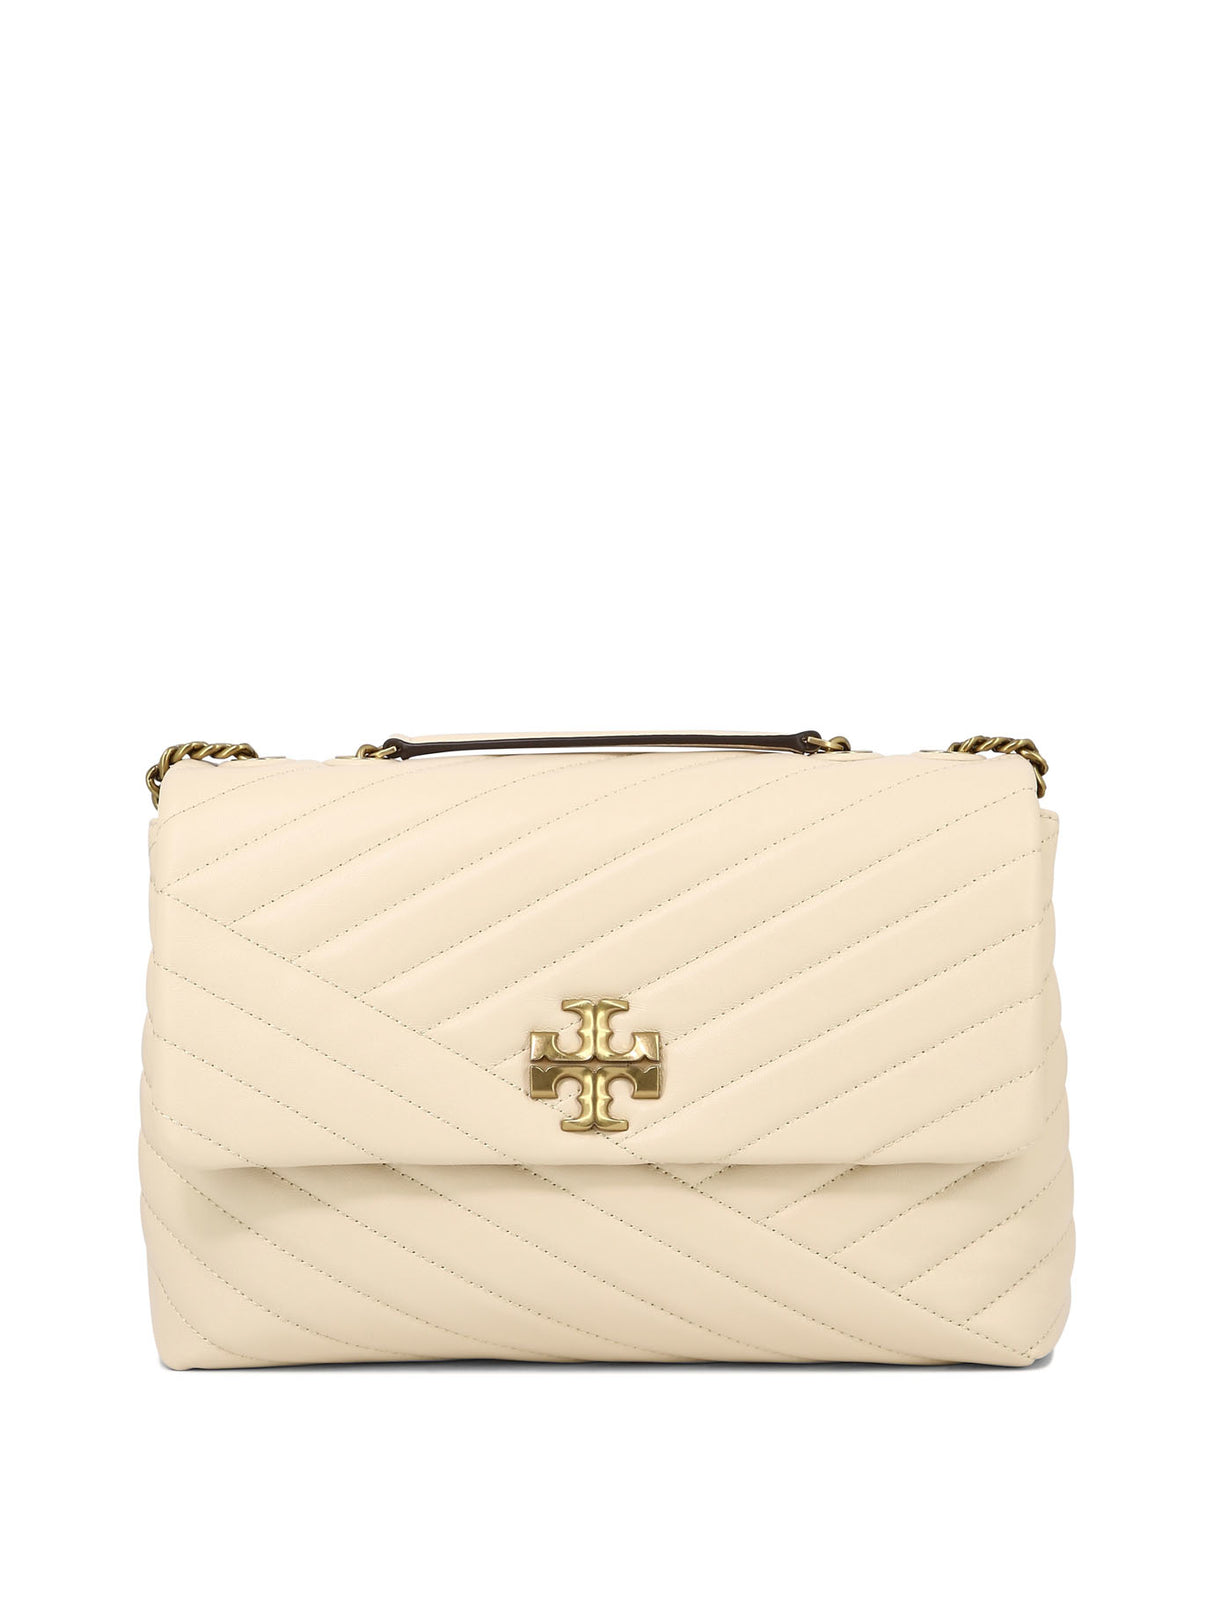 TORY BURCH Beige Leather Shoulder Bag for Women - SS24 Collection